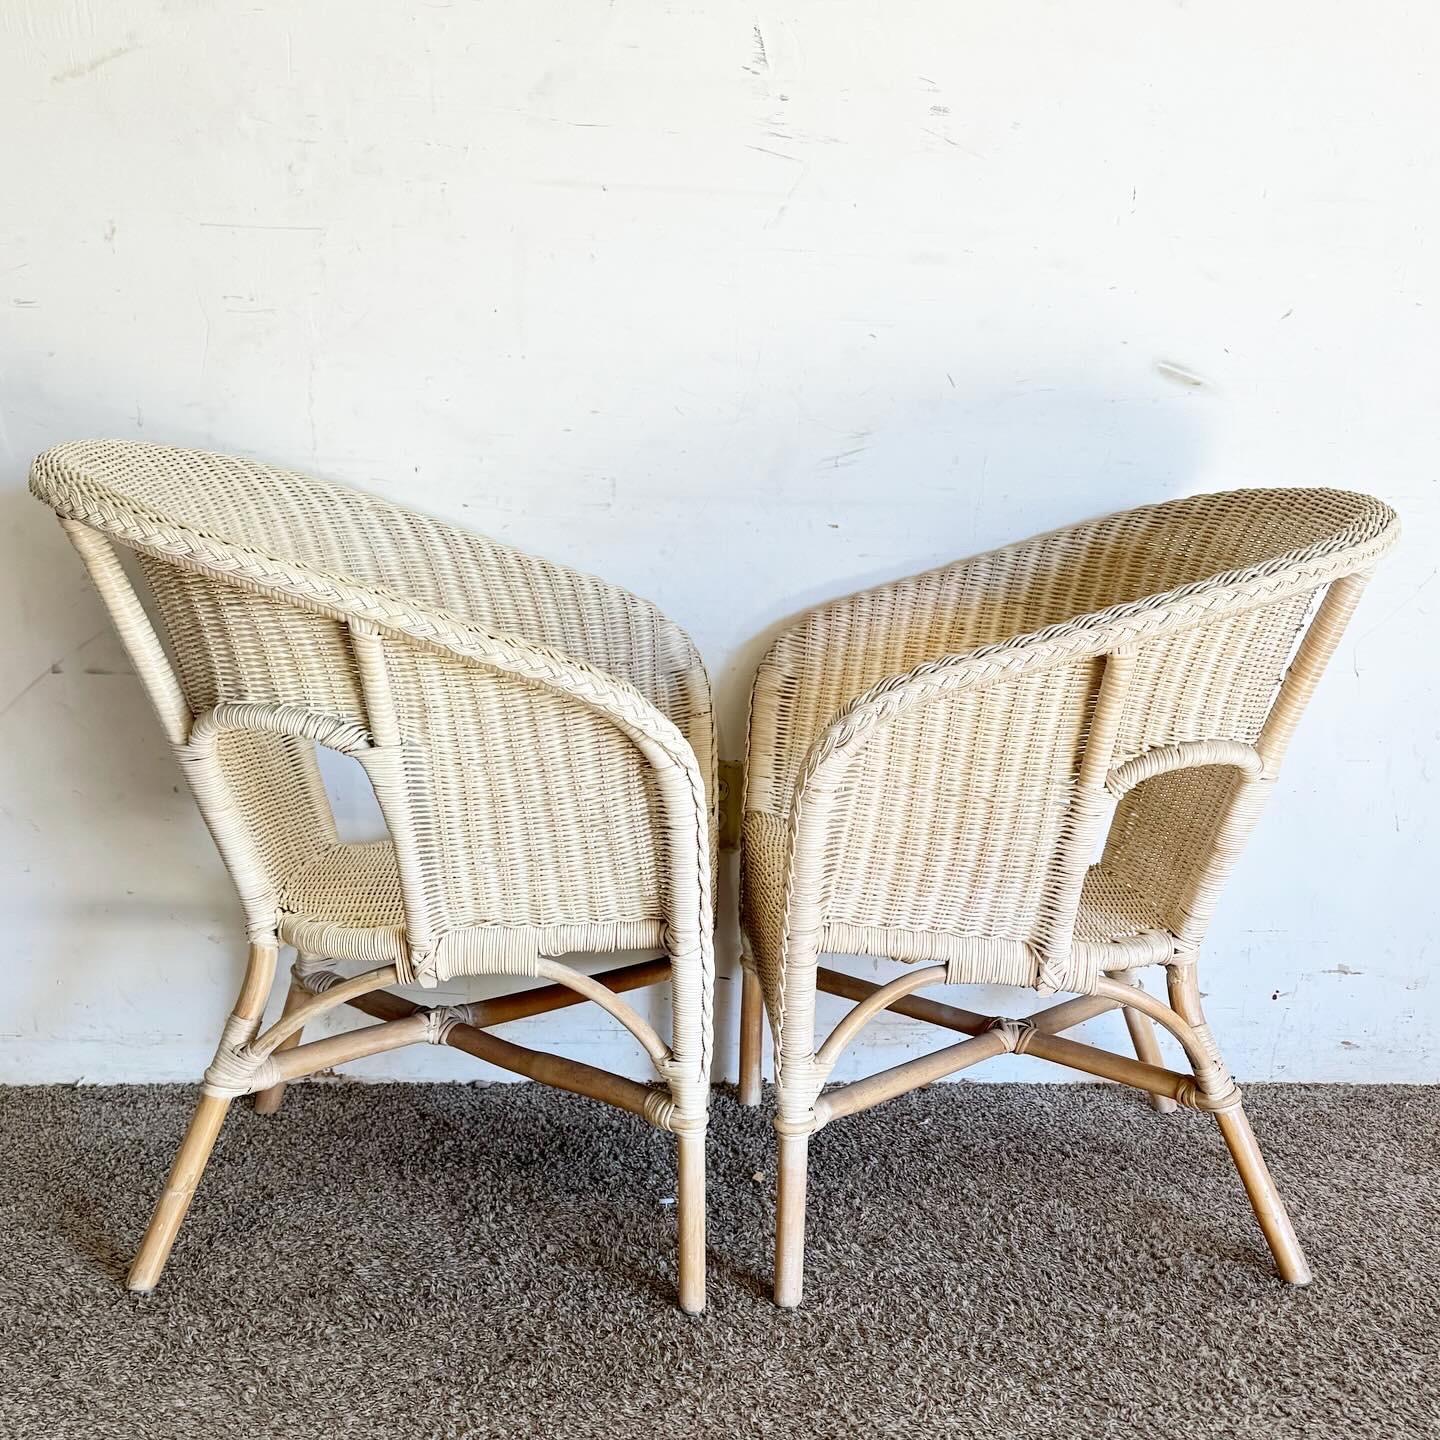 Boho Chic White Washed Wicker and Rattan Lounge Chairs - a Pair In Good Condition For Sale In Delray Beach, FL